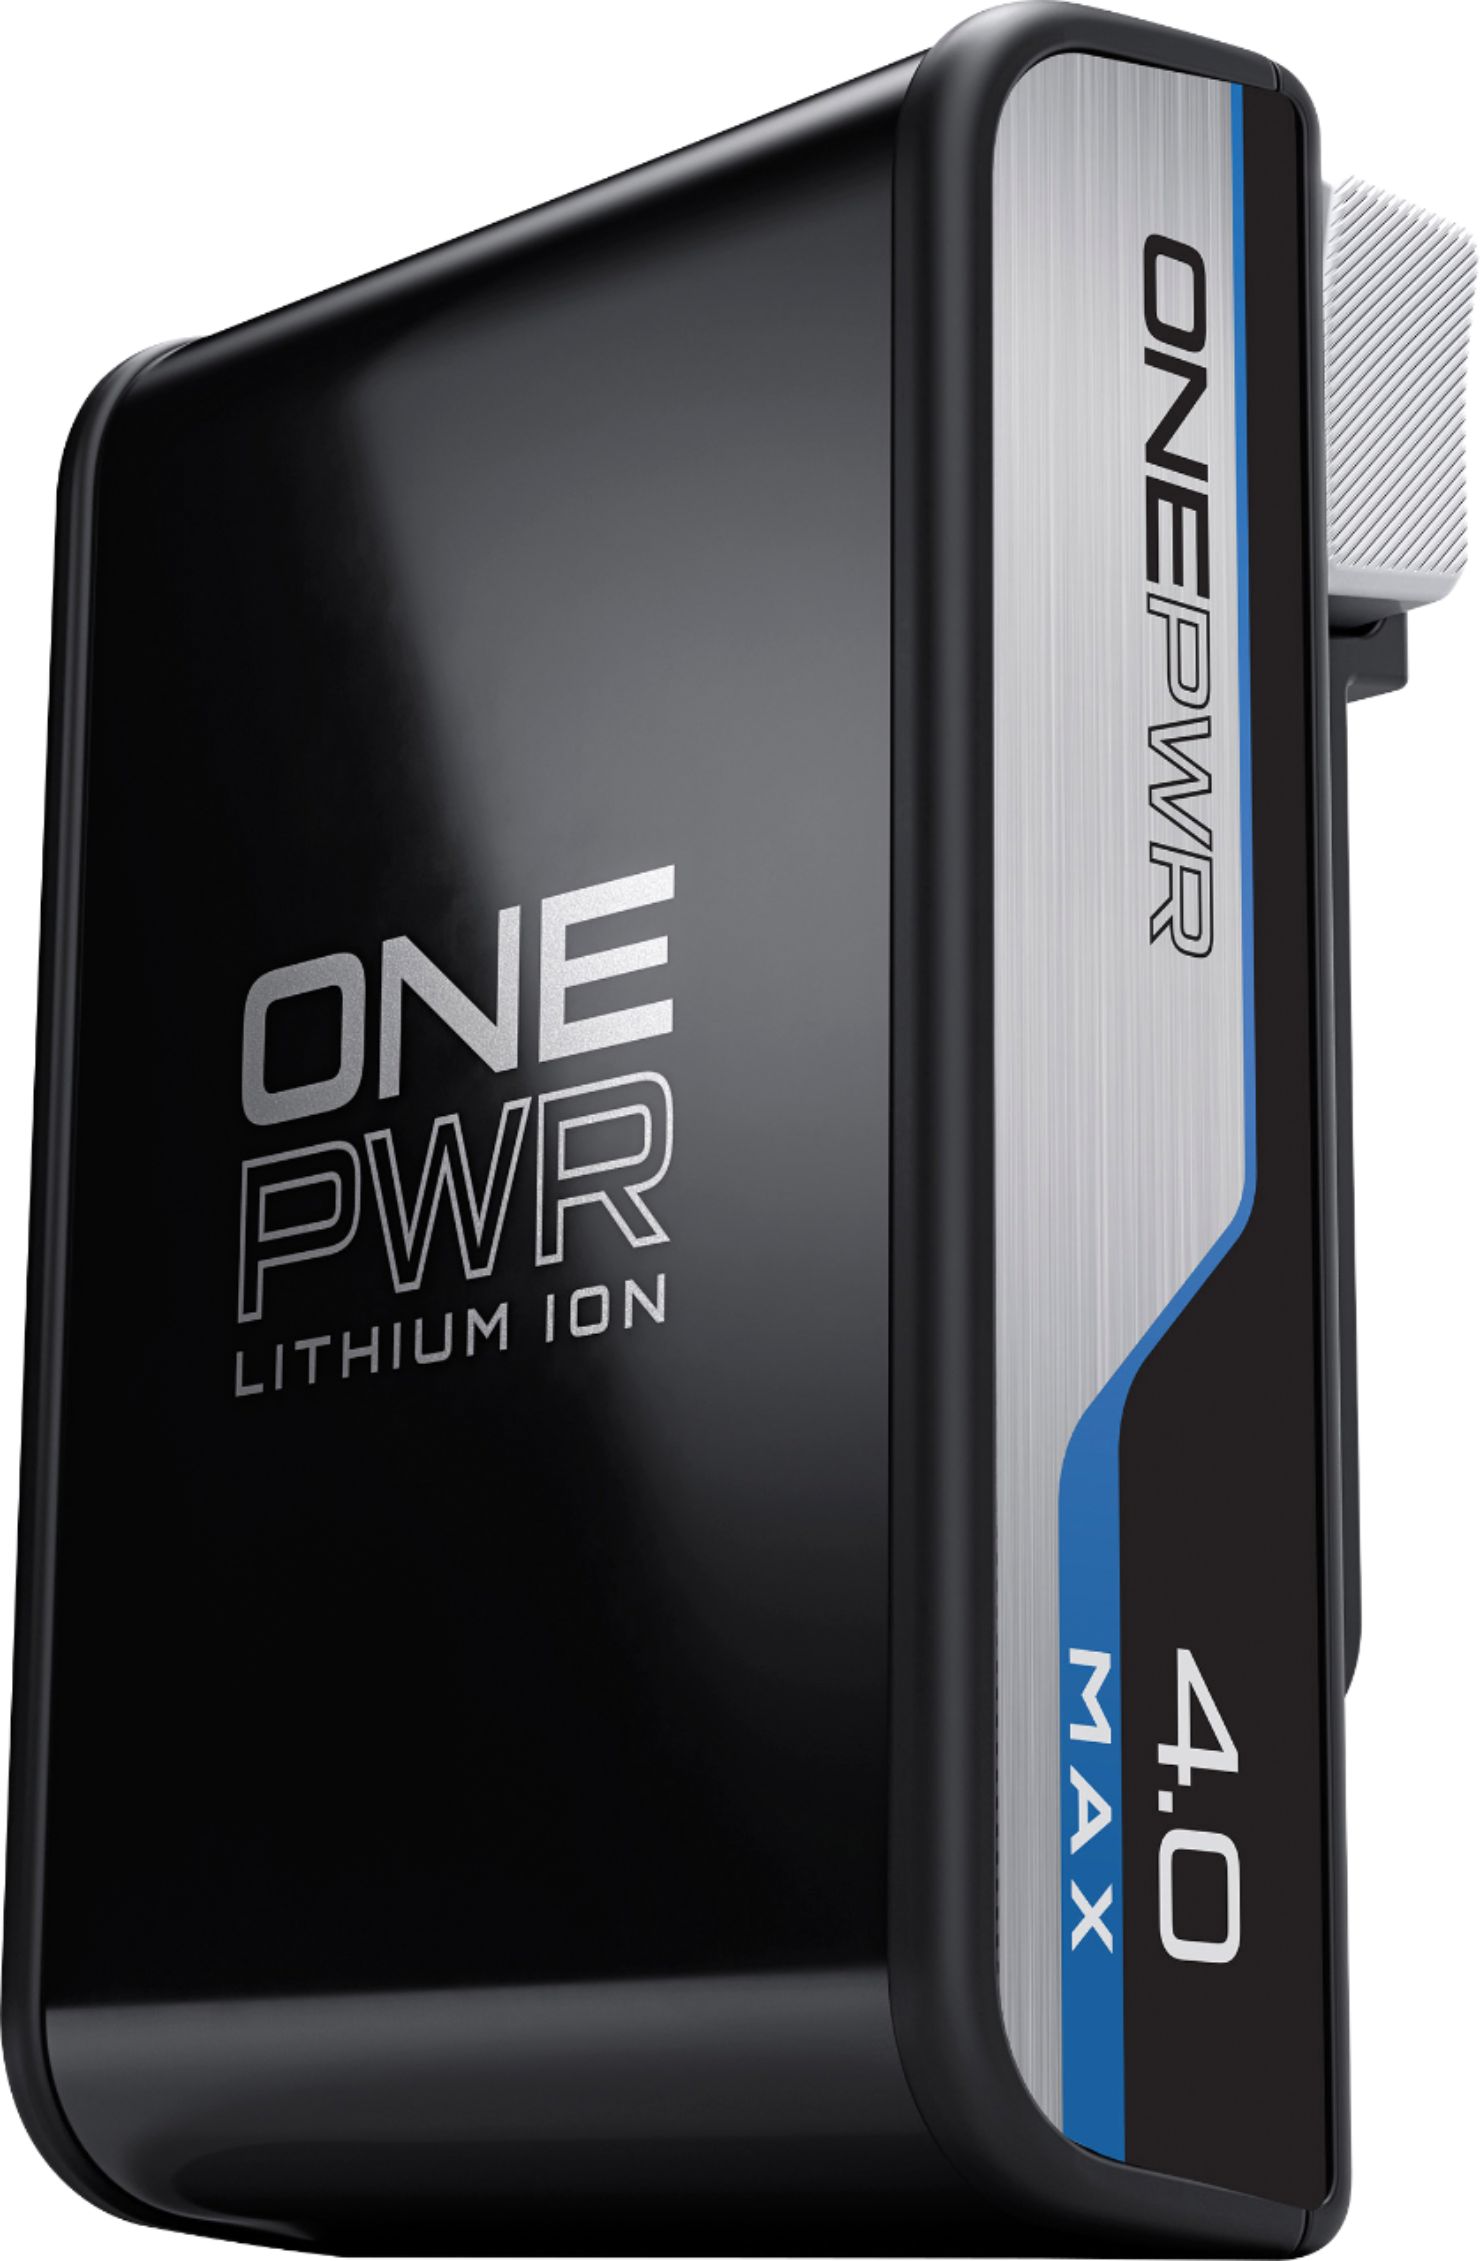 Best Buy: Hoover ONEPWR 4 Ah Lithium Ion Battery BH25040